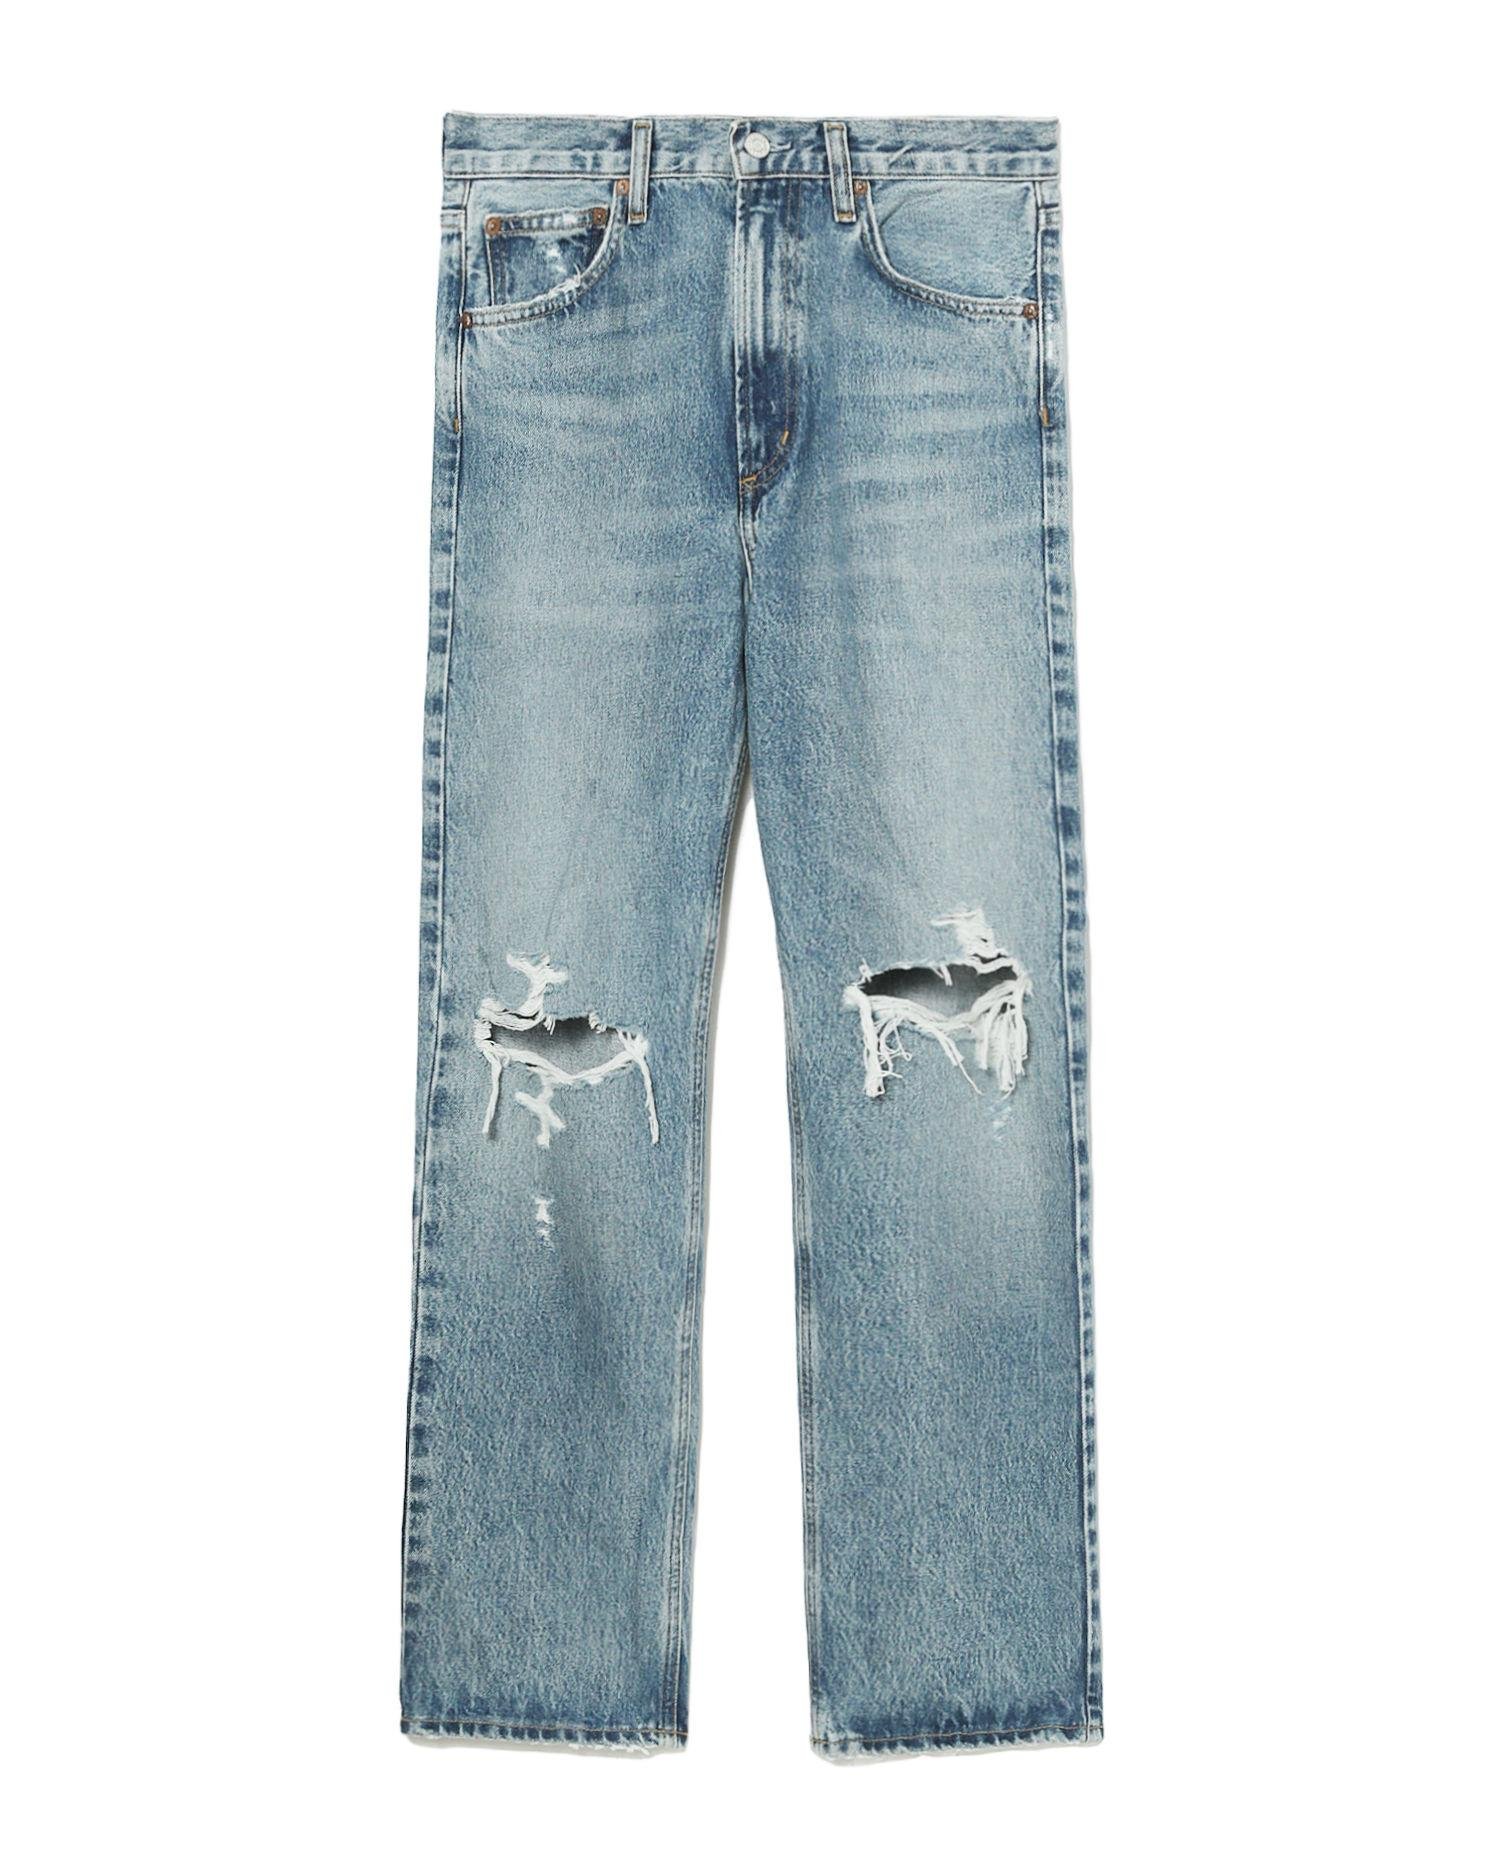 Distressed denim jeans by AGOLDE